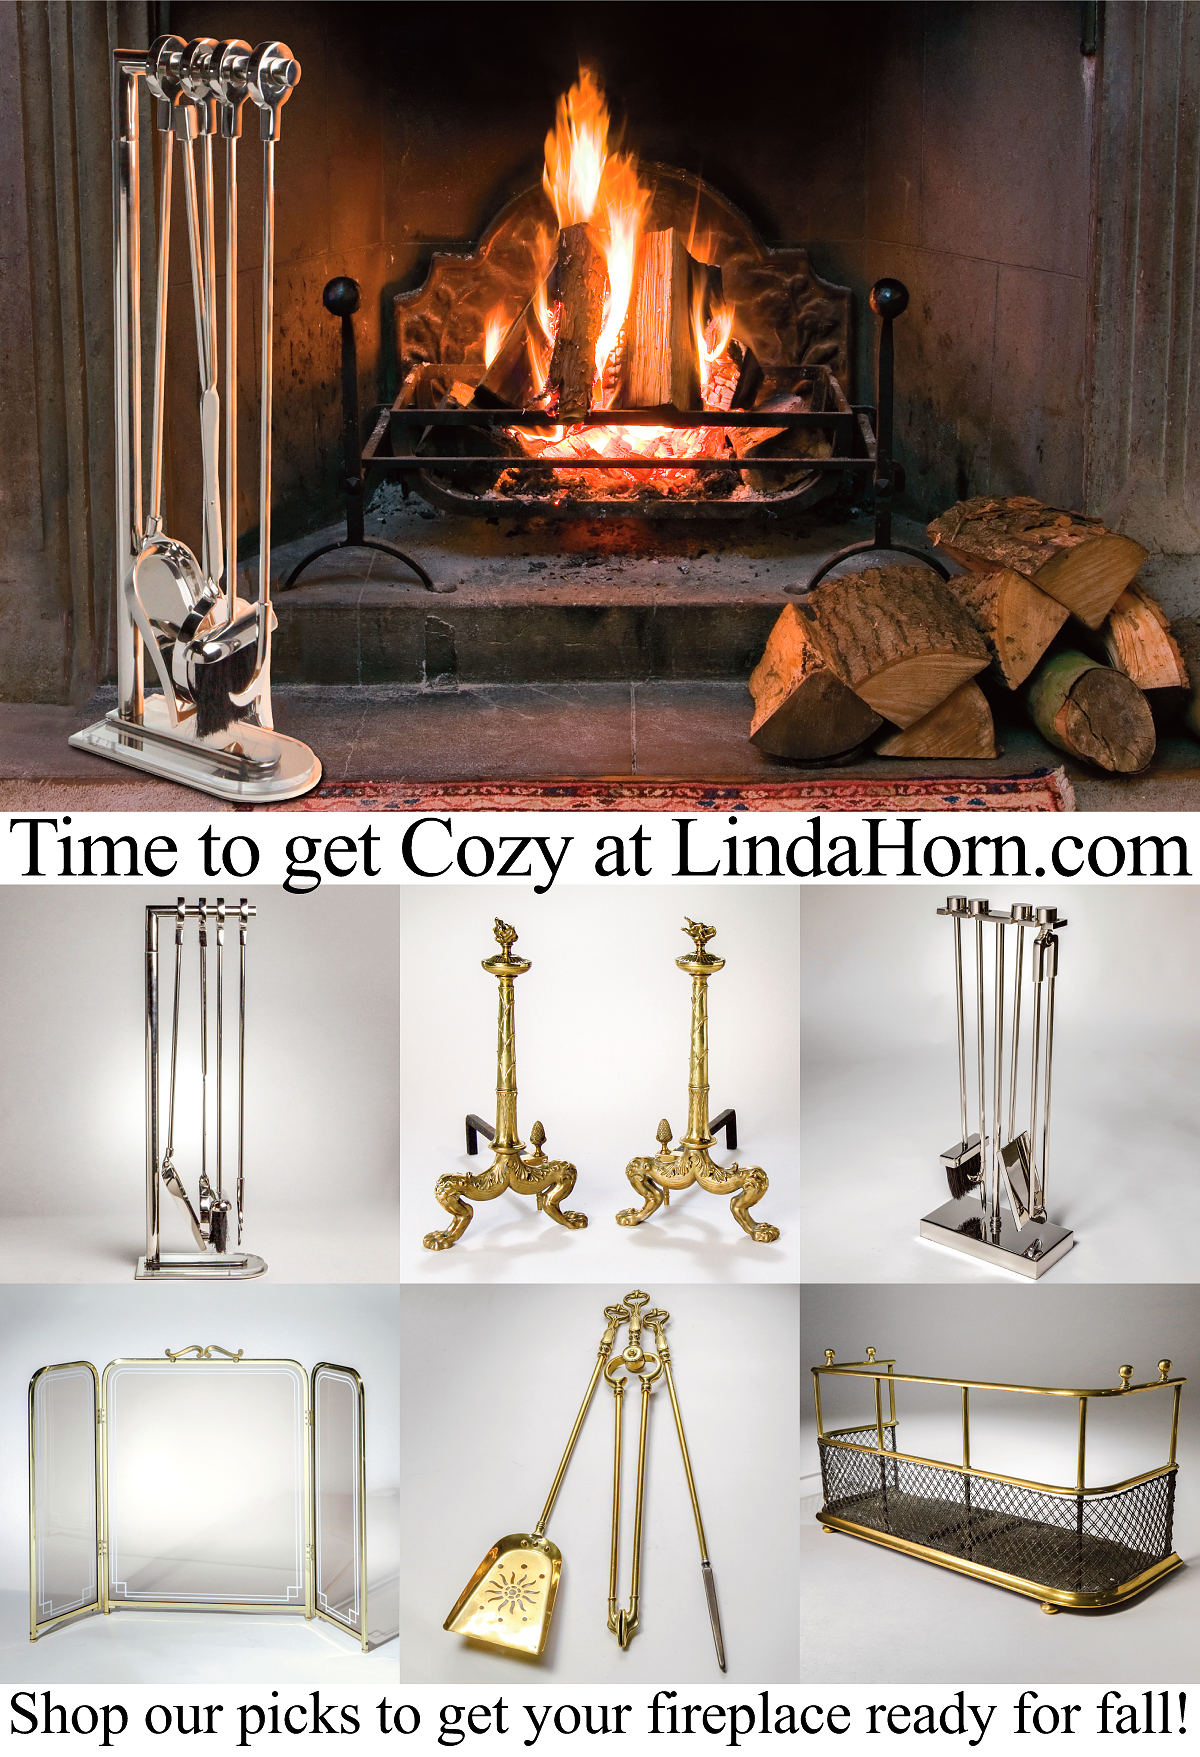 Get your fireplace ready for fall!